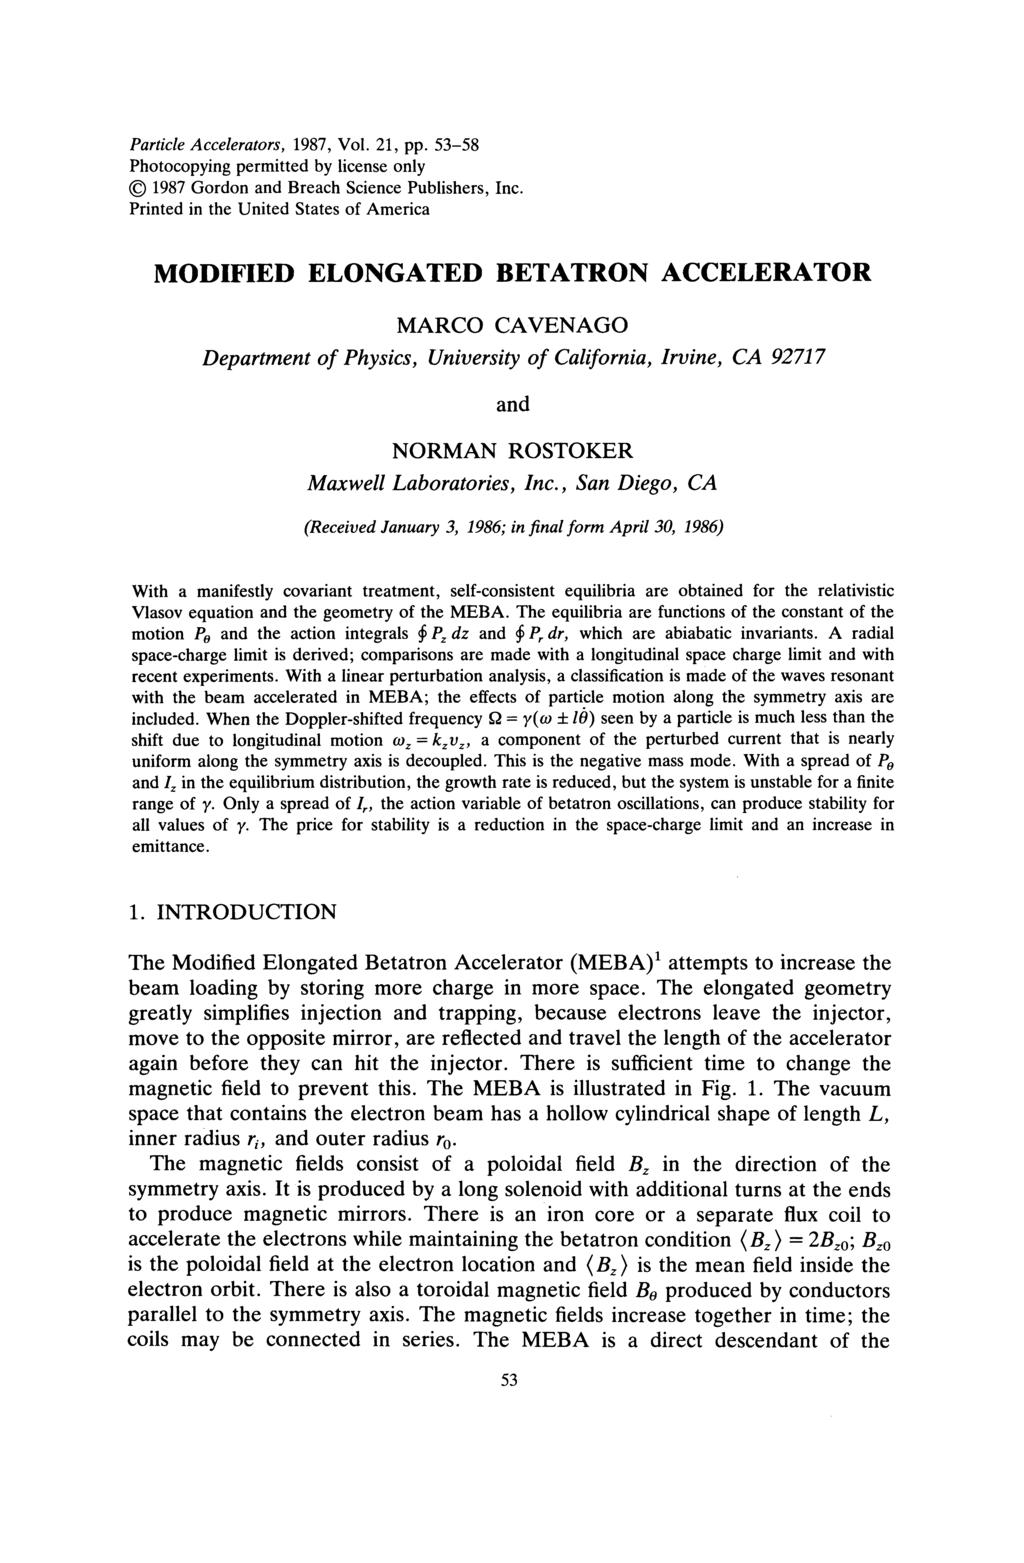 Particle Accelerators, 1987, Vol. 21, pp. 53-58 Photocopying permitted by license only 1987 Gordon and Breach Science Publishers, Inc.